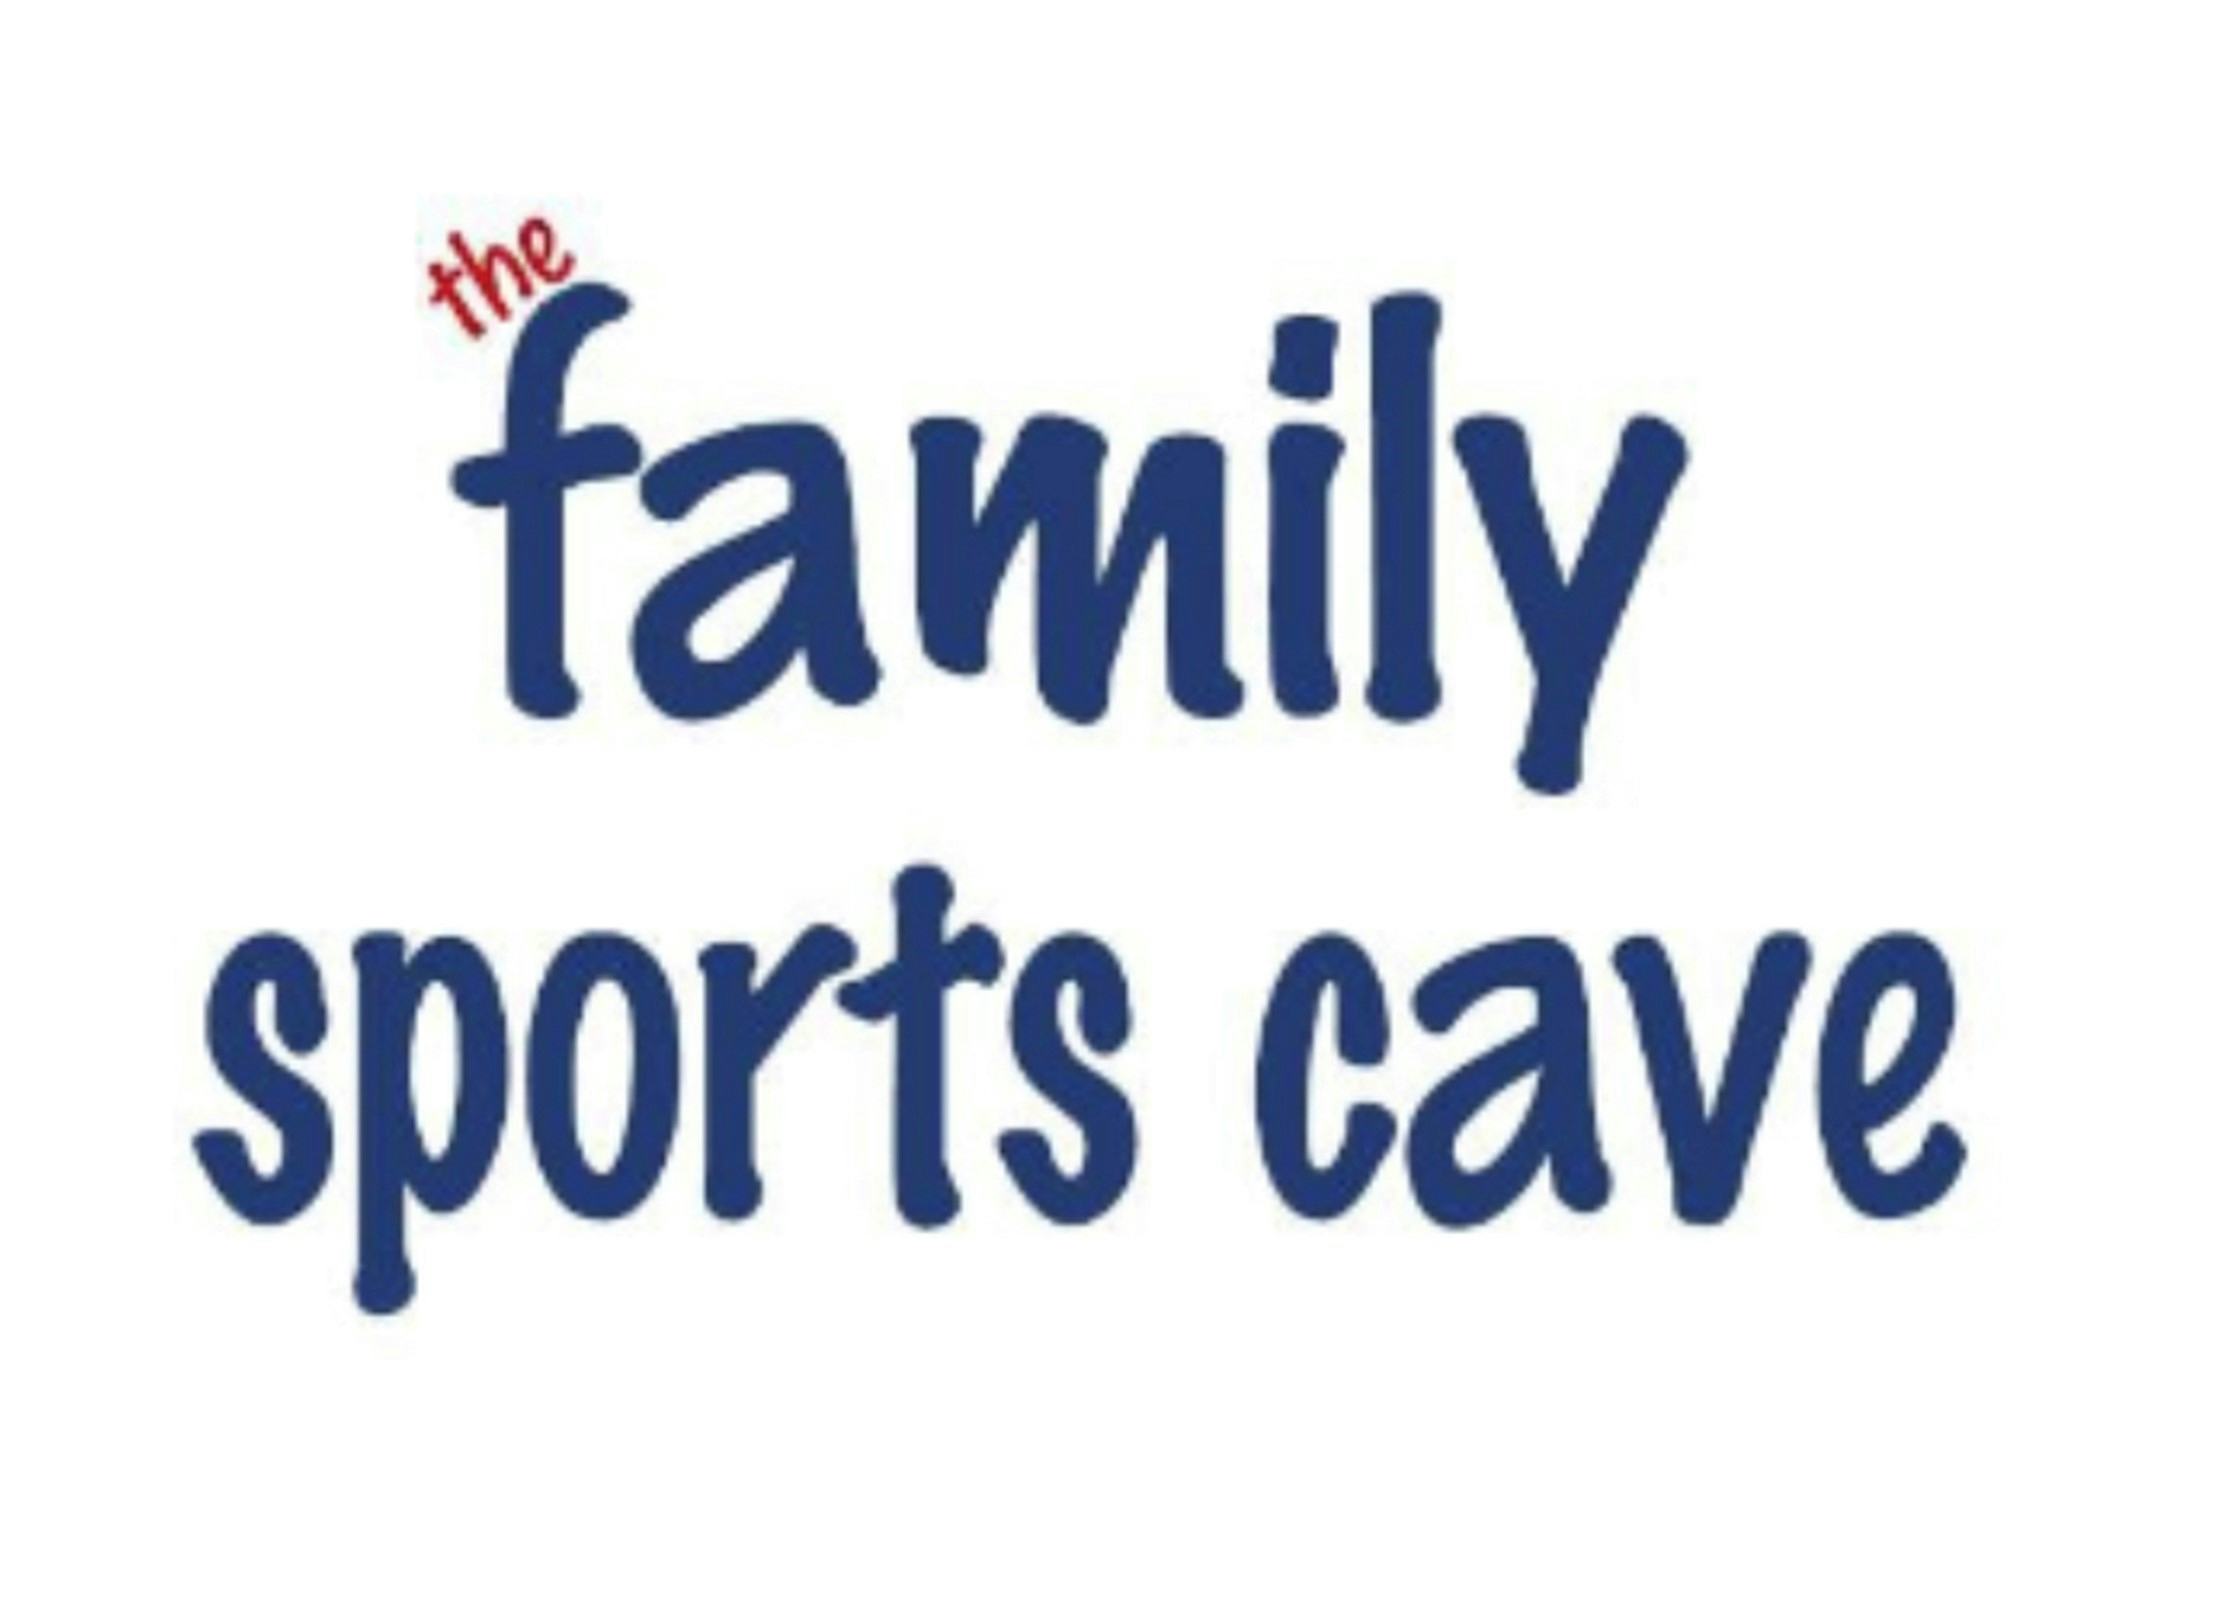 The Family Sports Cave Logo